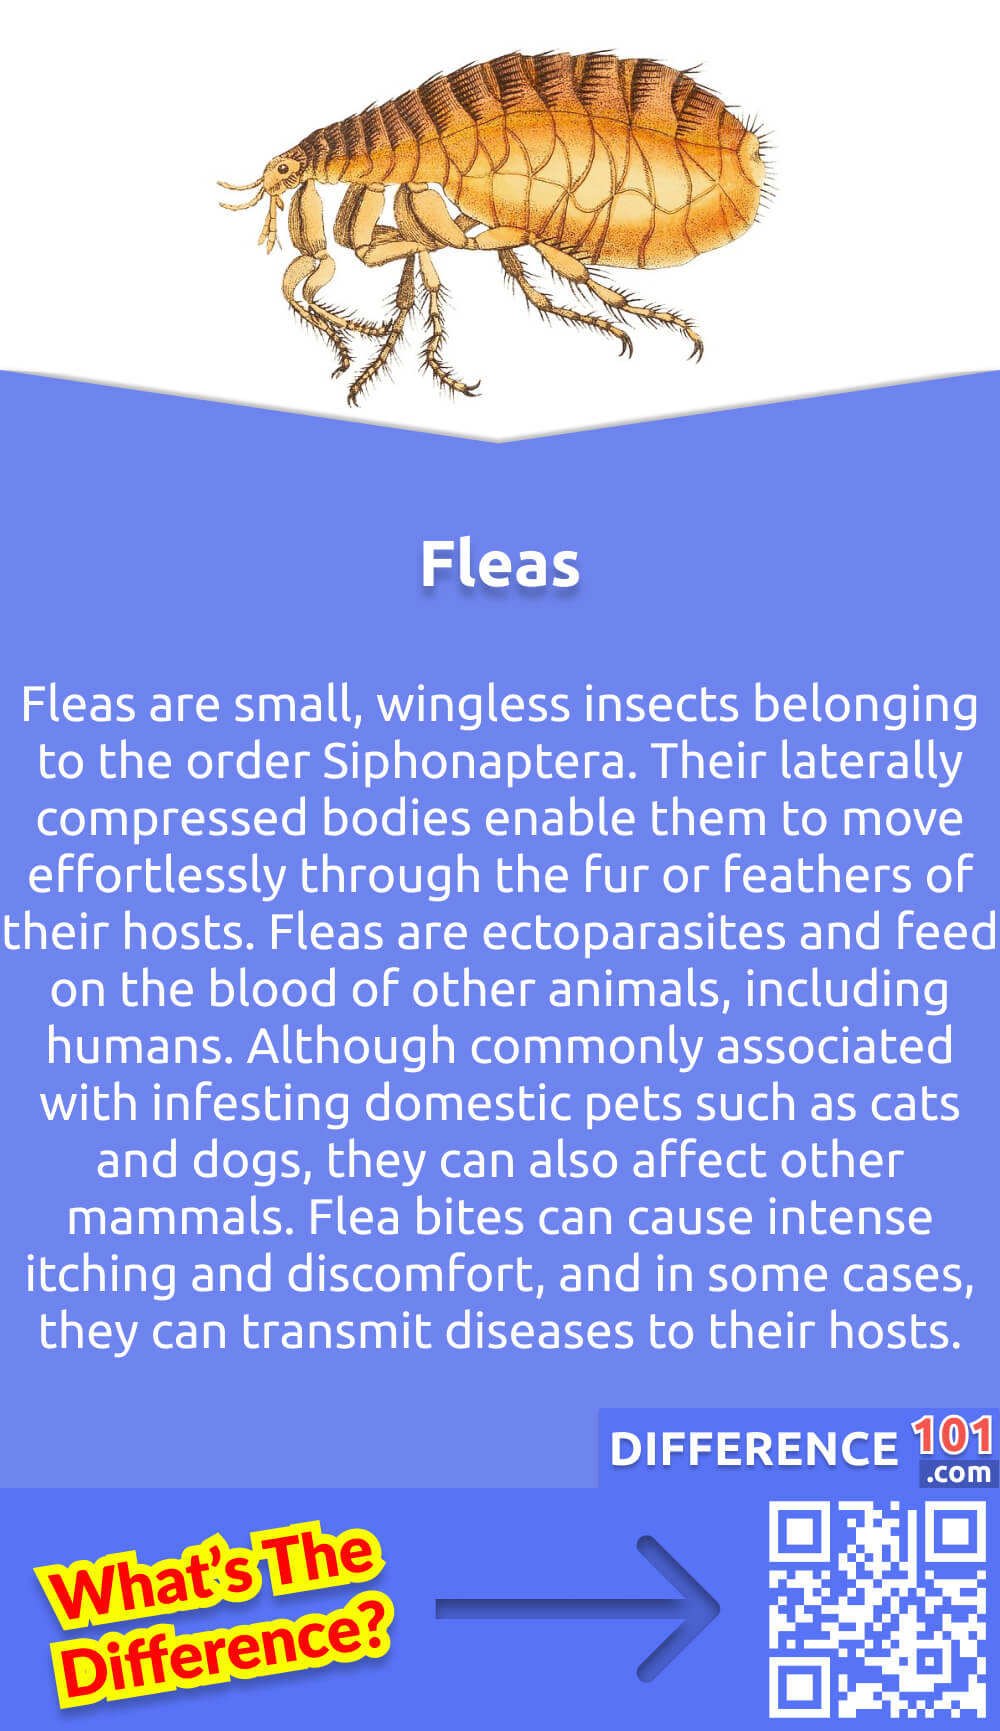 What Are Fleas? Fleas are small, wingless insects belonging to the order Siphonaptera. Their laterally compressed bodies enable them to move effortlessly through the fur or feathers of their hosts. Fleas are ectoparasites and feed on the blood of other animals, including humans. Although commonly associated with infesting domestic pets such as cats and dogs, they can also affect other mammals. Flea bites can cause intense itching and discomfort, and in some cases, they can transmit diseases to their hosts. Fleas possess a remarkable ability to jump long distances due to their powerful hind legs, allowing them to navigate through their environment and find new hosts.